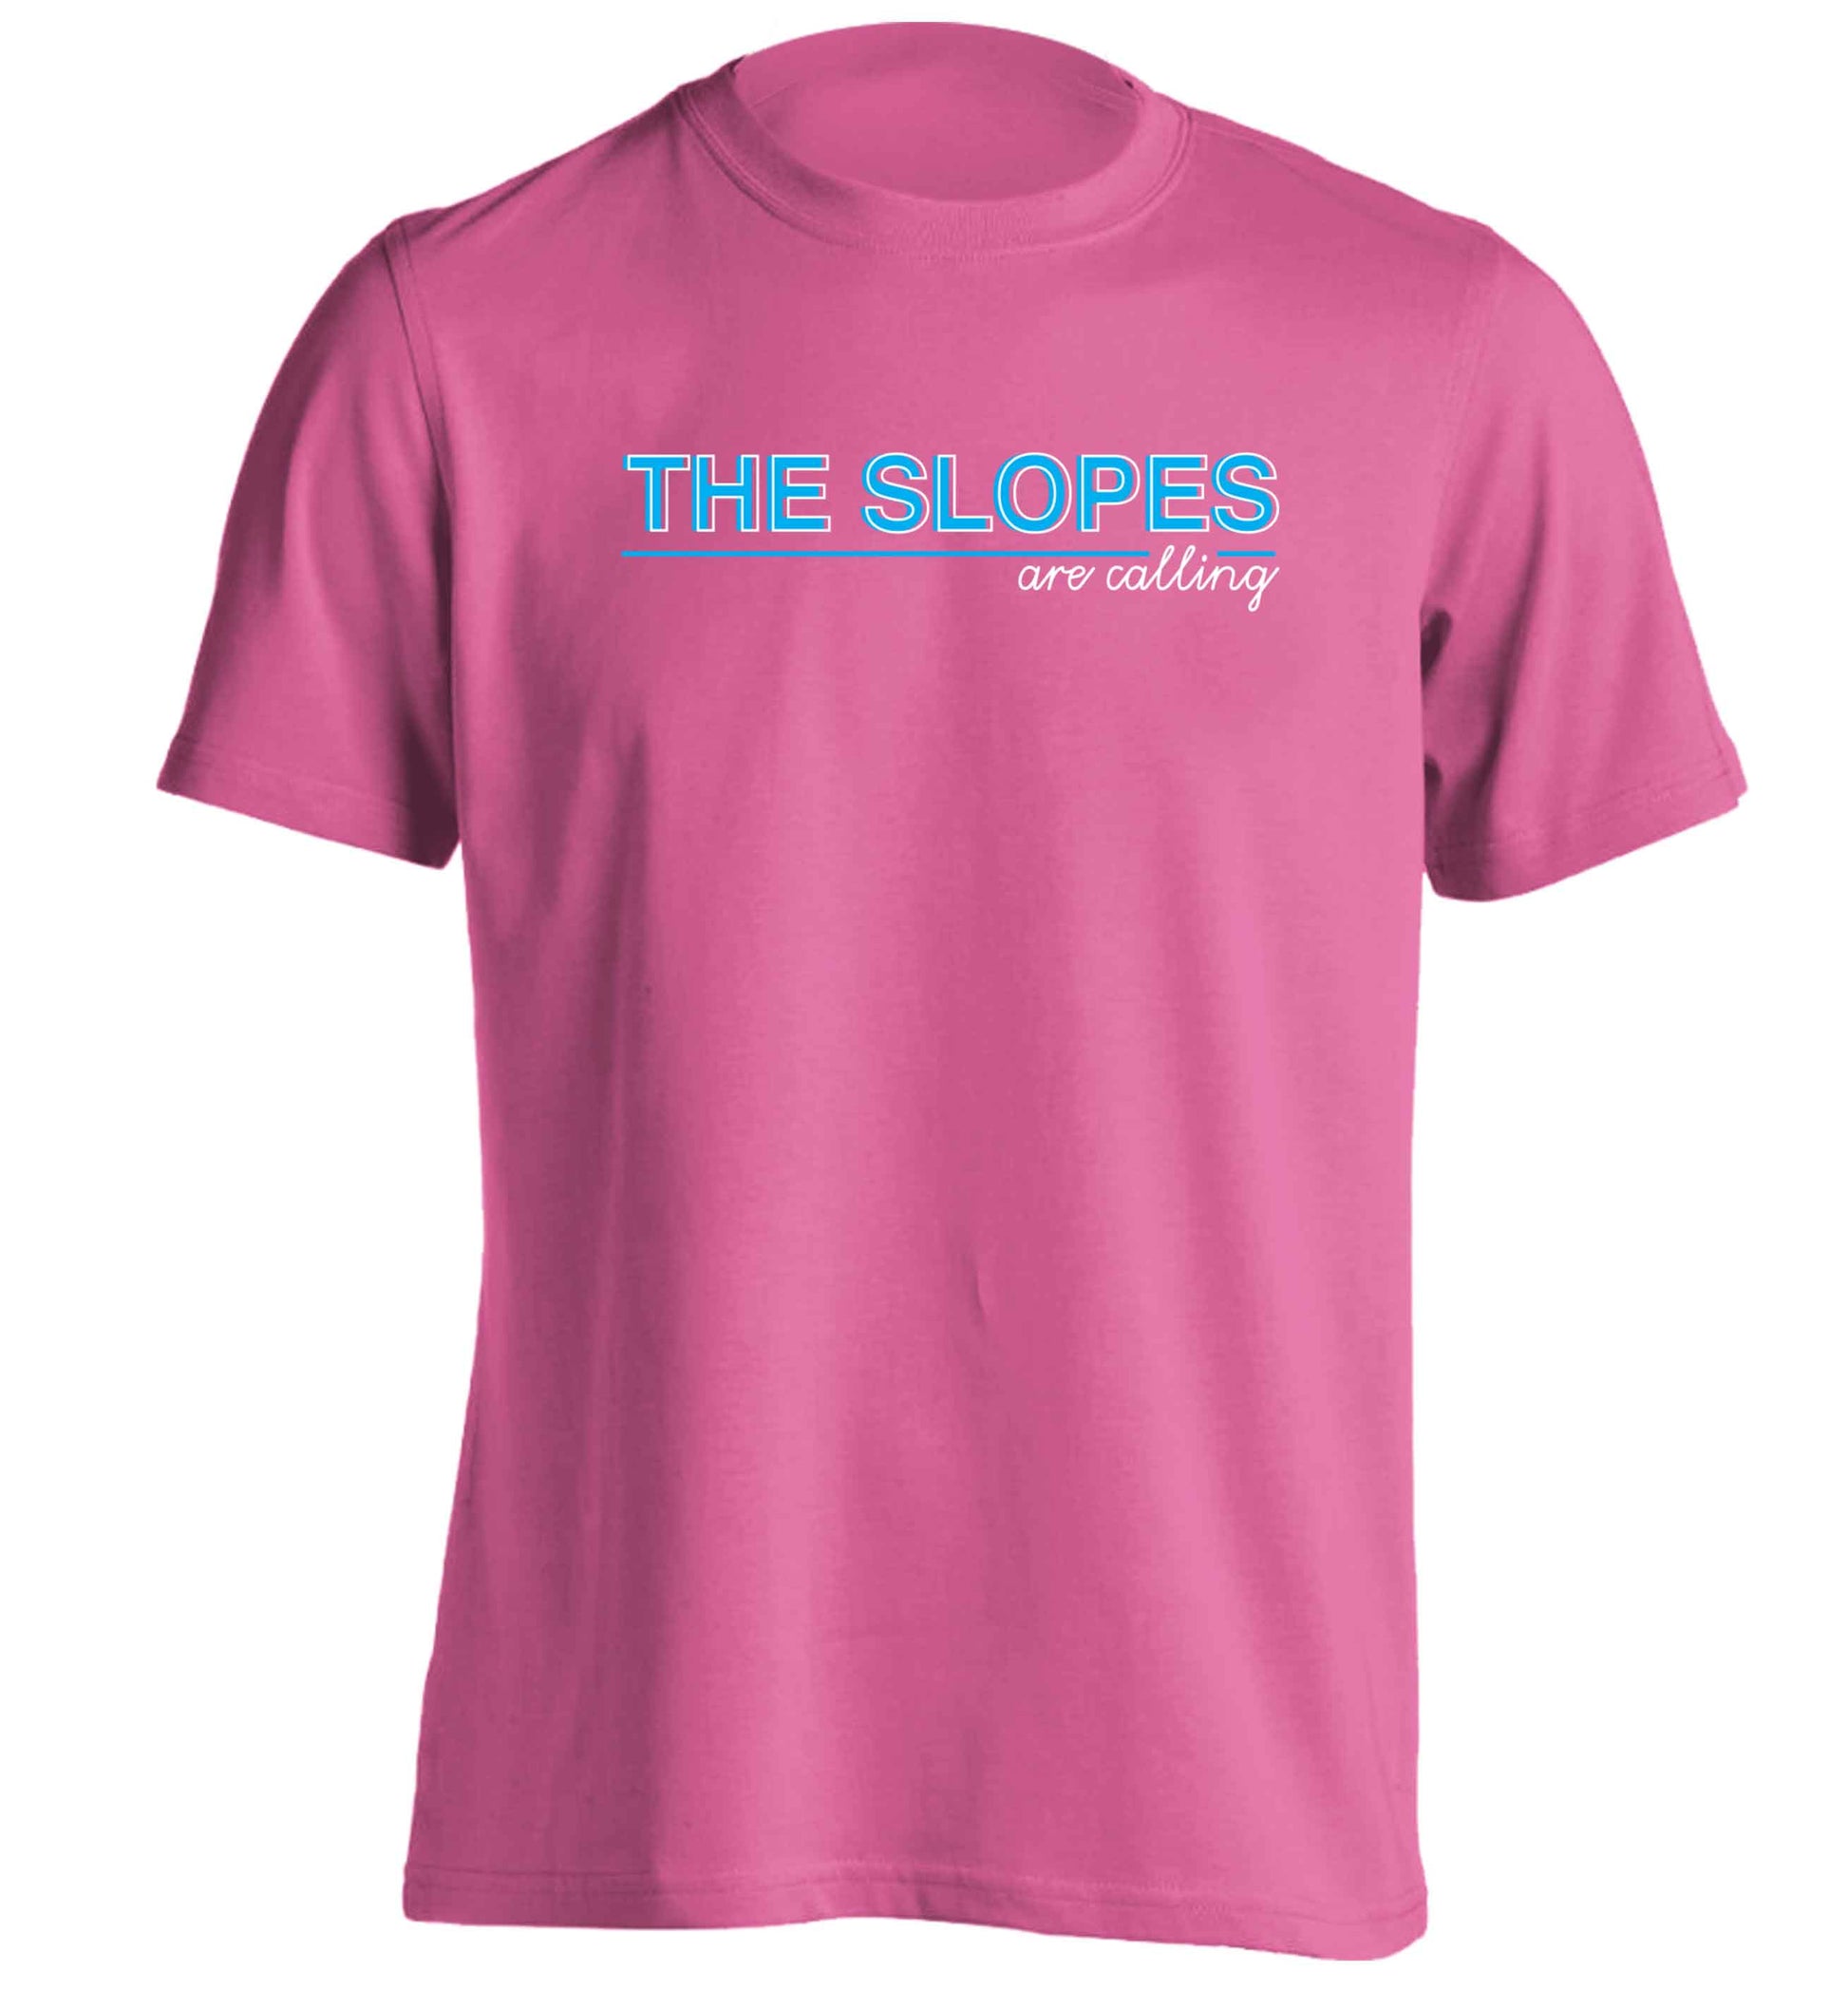 The slopes are calling adults unisex pink Tshirt 2XL